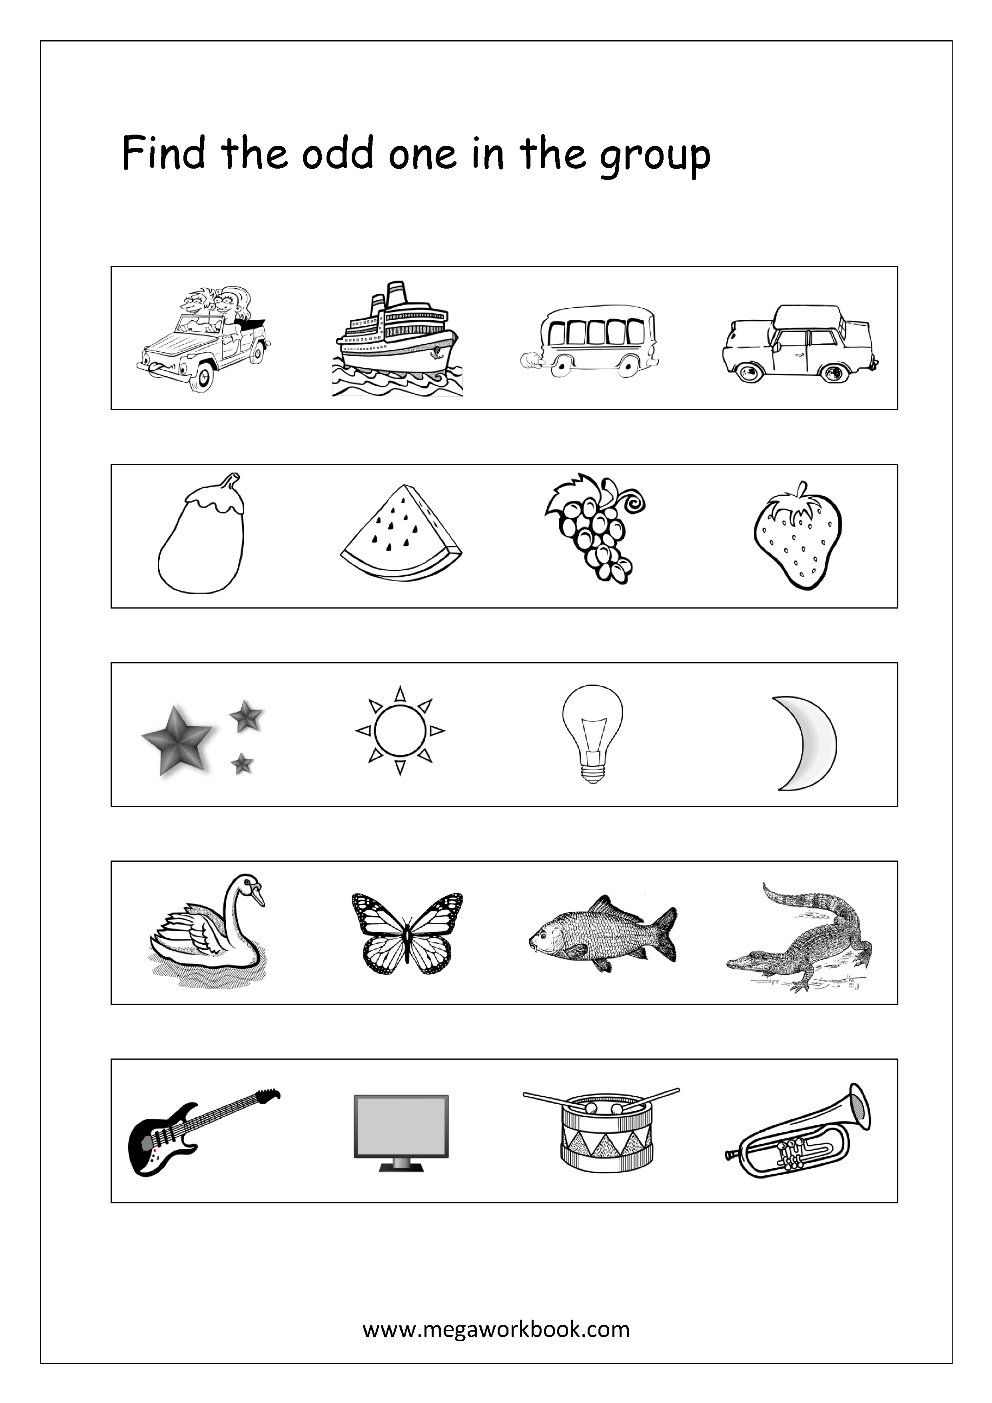 Odd One Out Worksheet